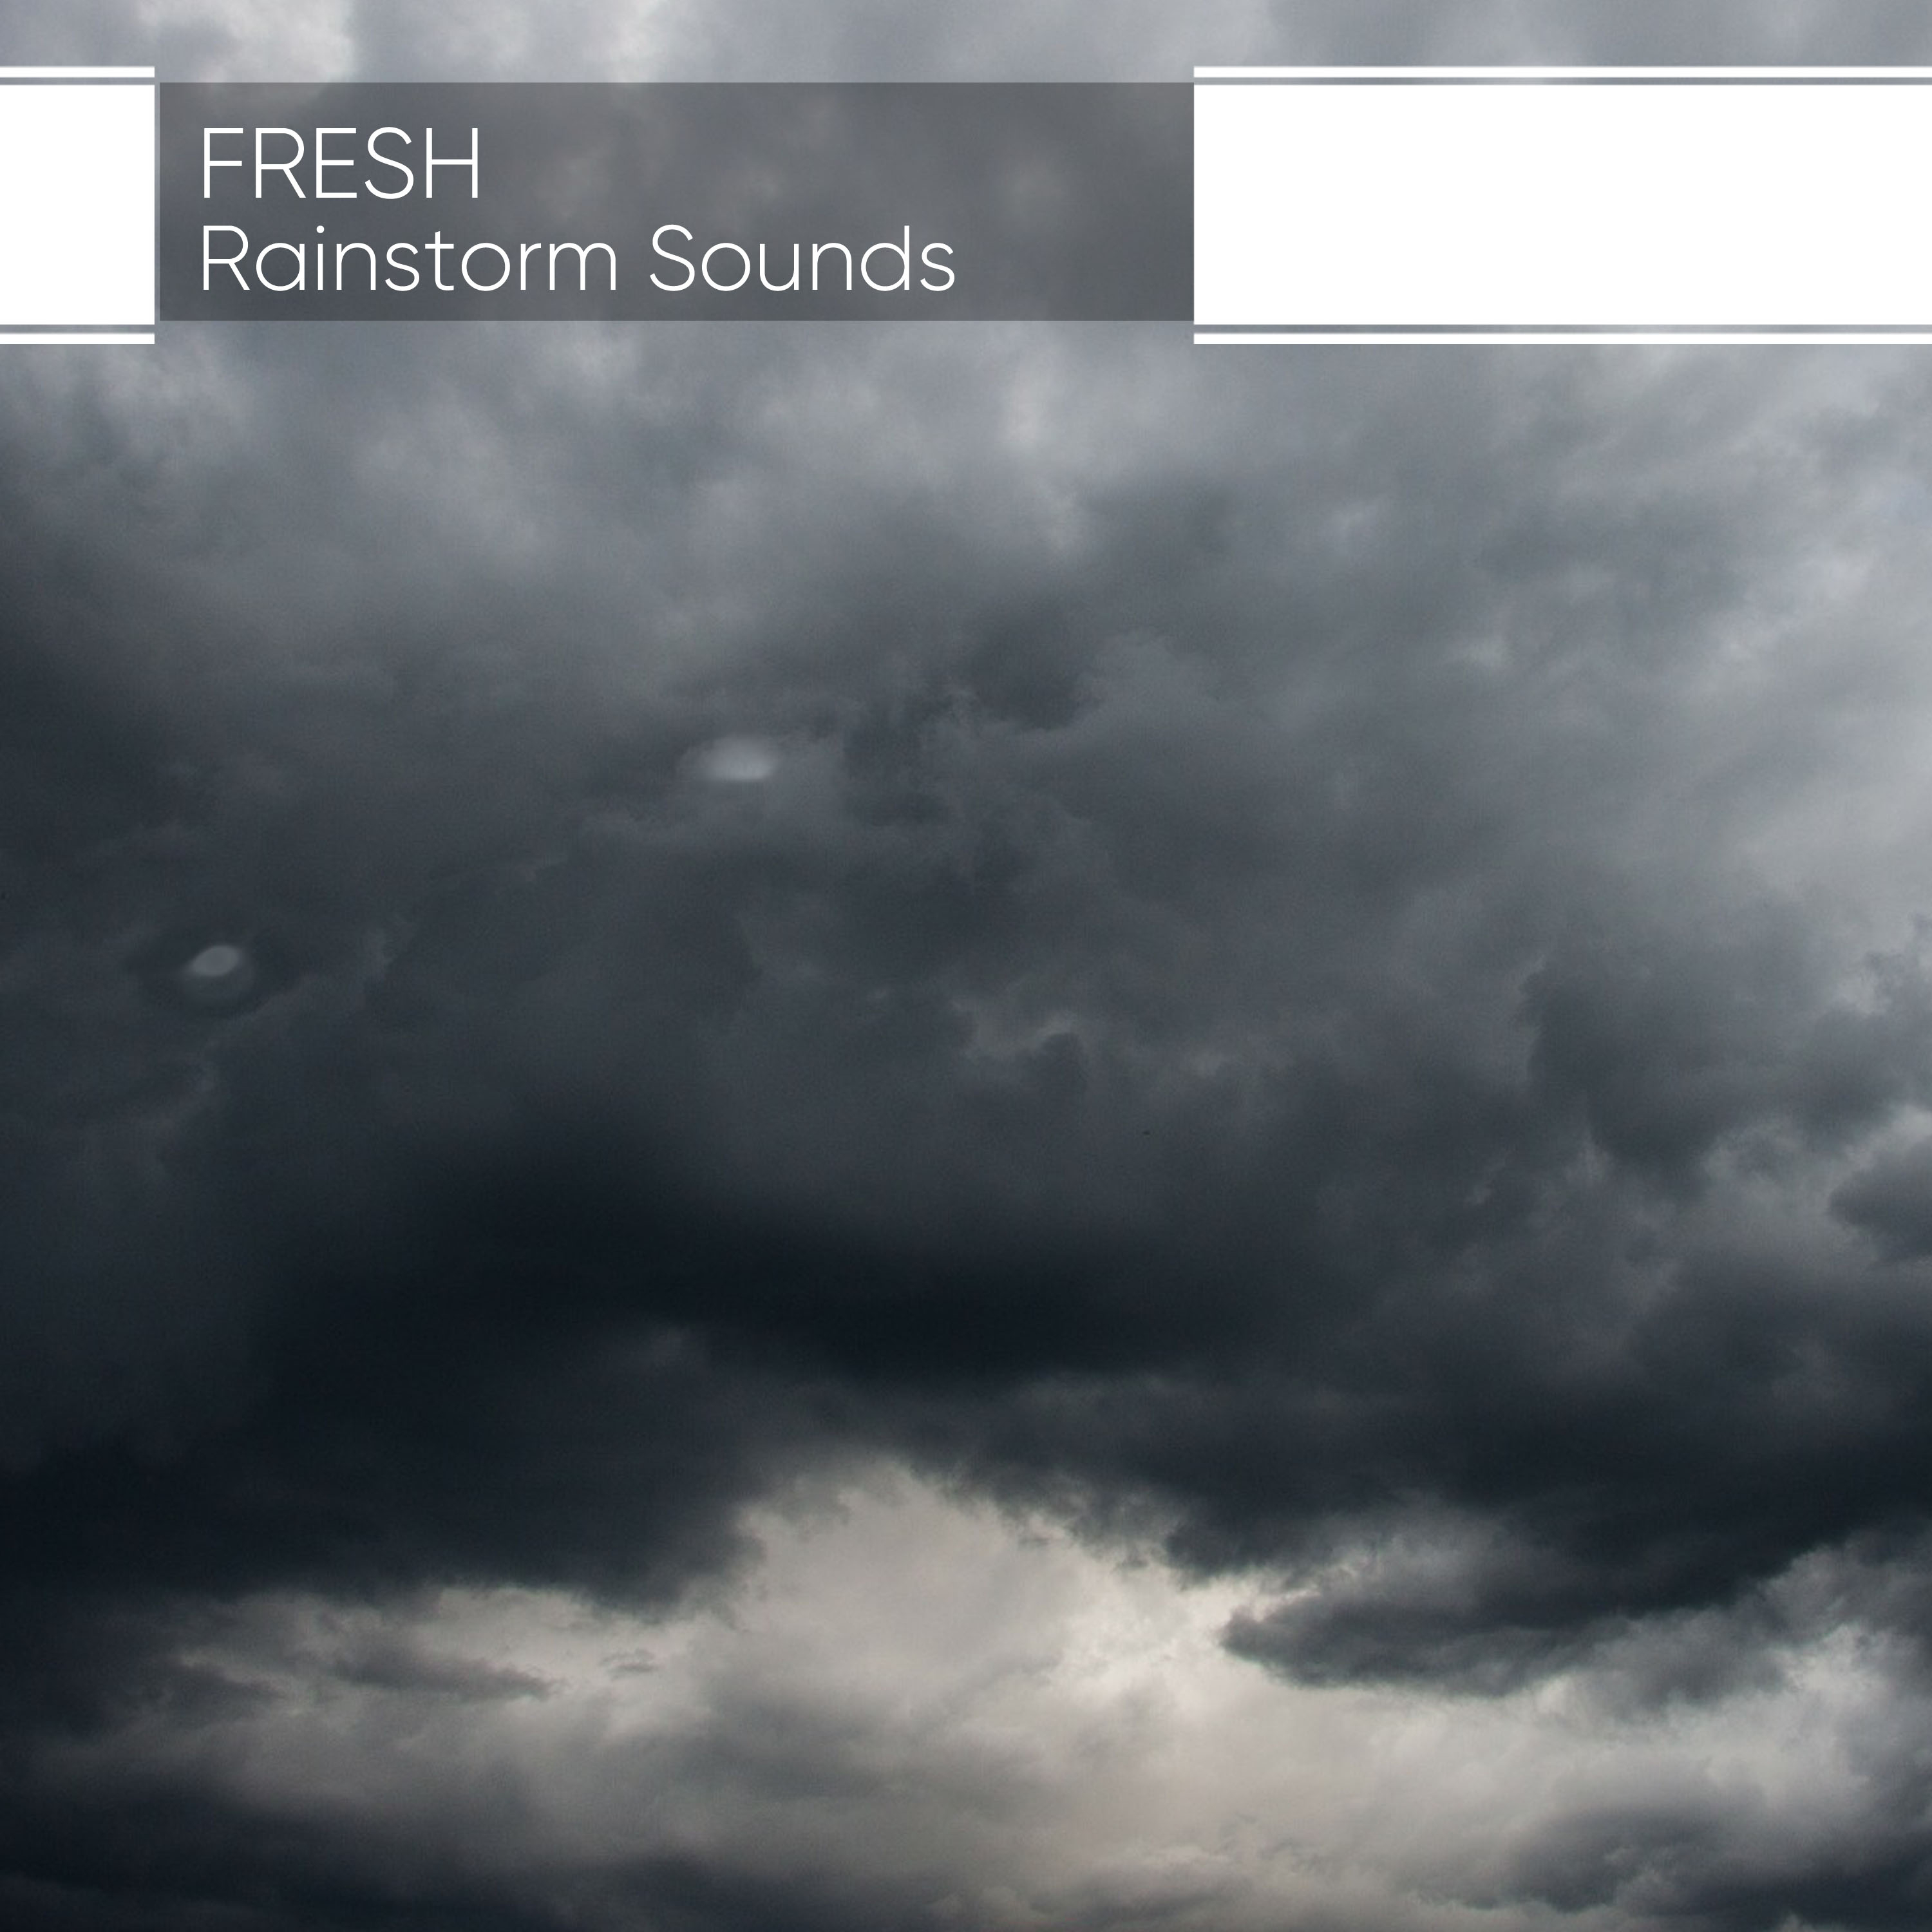 Fresh Rainstorm Sounds from Mother Earth